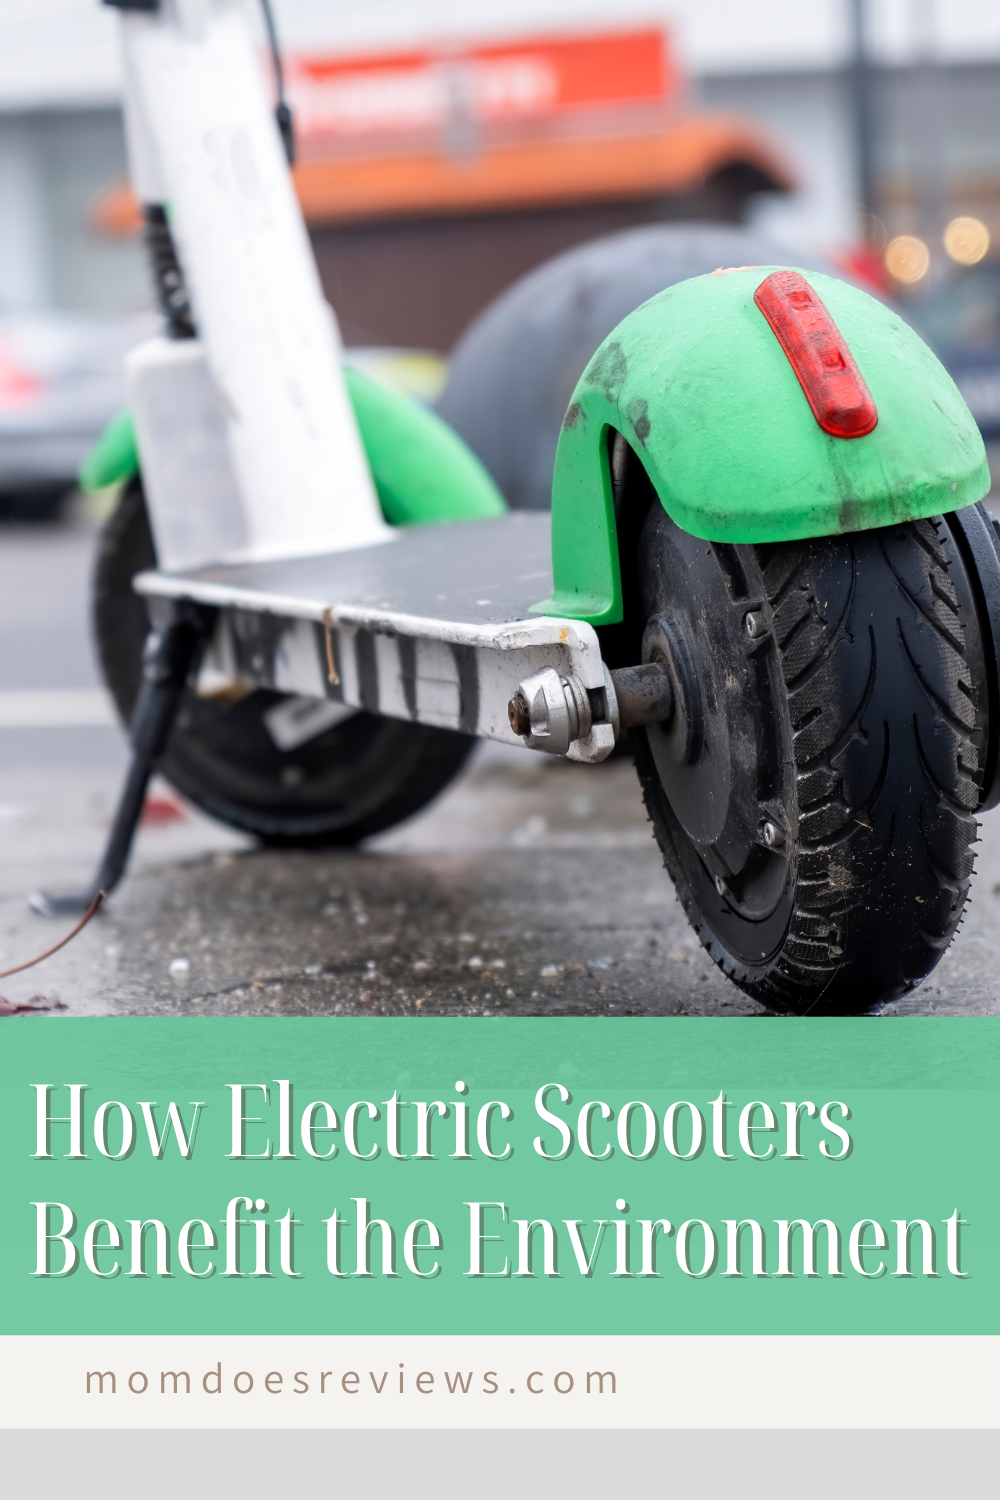 How Electric Scooters Benefit the Environment